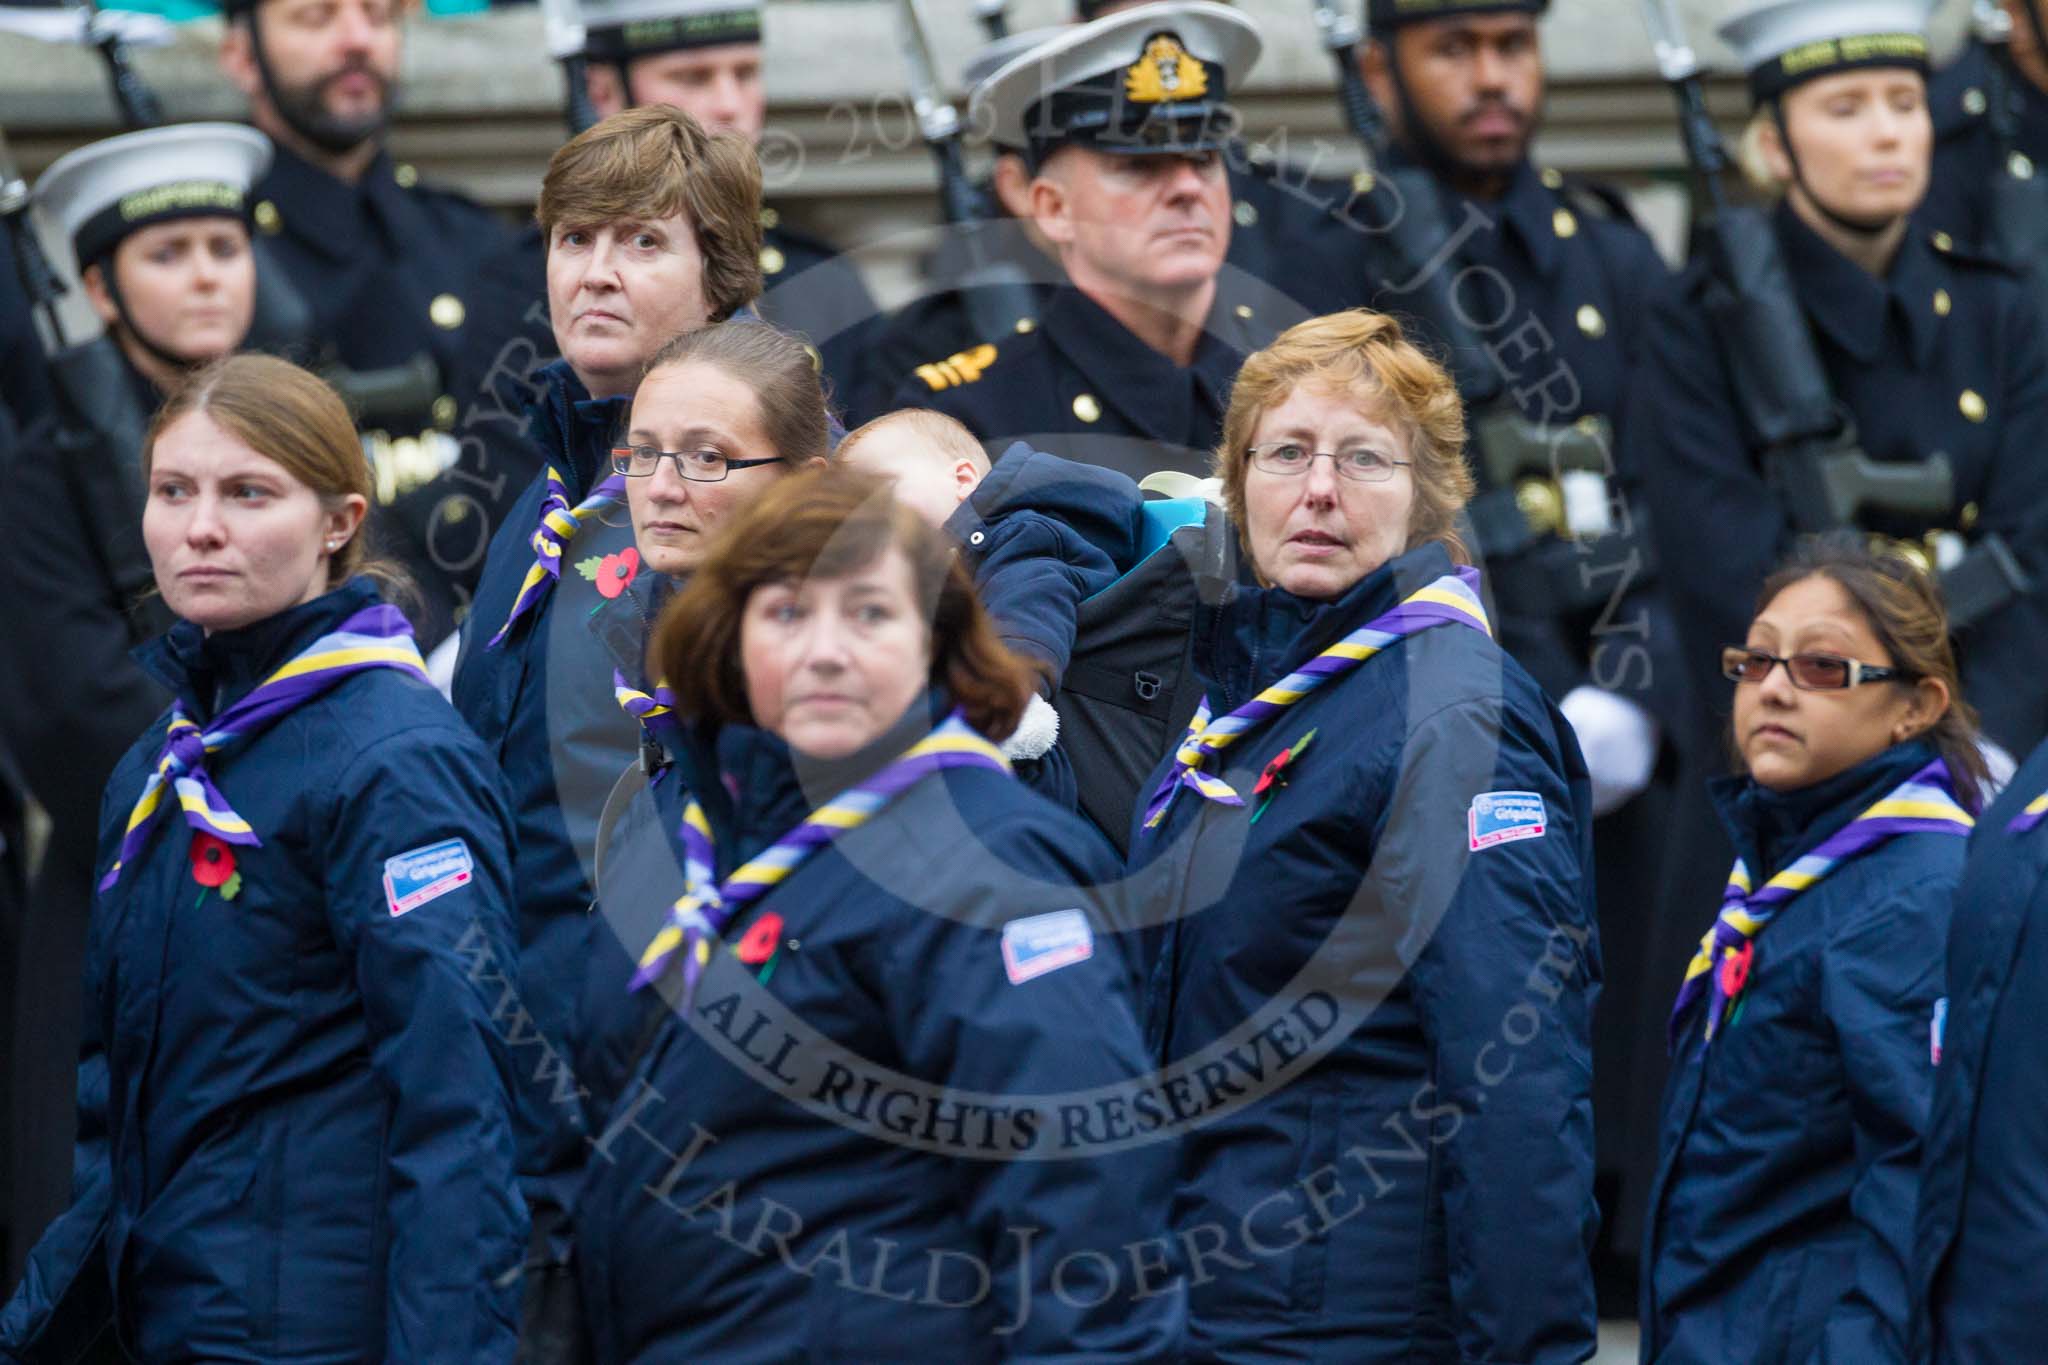 Remembrance Sunday at the Cenotaph 2015: Group M51, Girlguiding London & South East England.
Cenotaph, Whitehall, London SW1,
London,
Greater London,
United Kingdom,
on 08 November 2015 at 12:21, image #1734